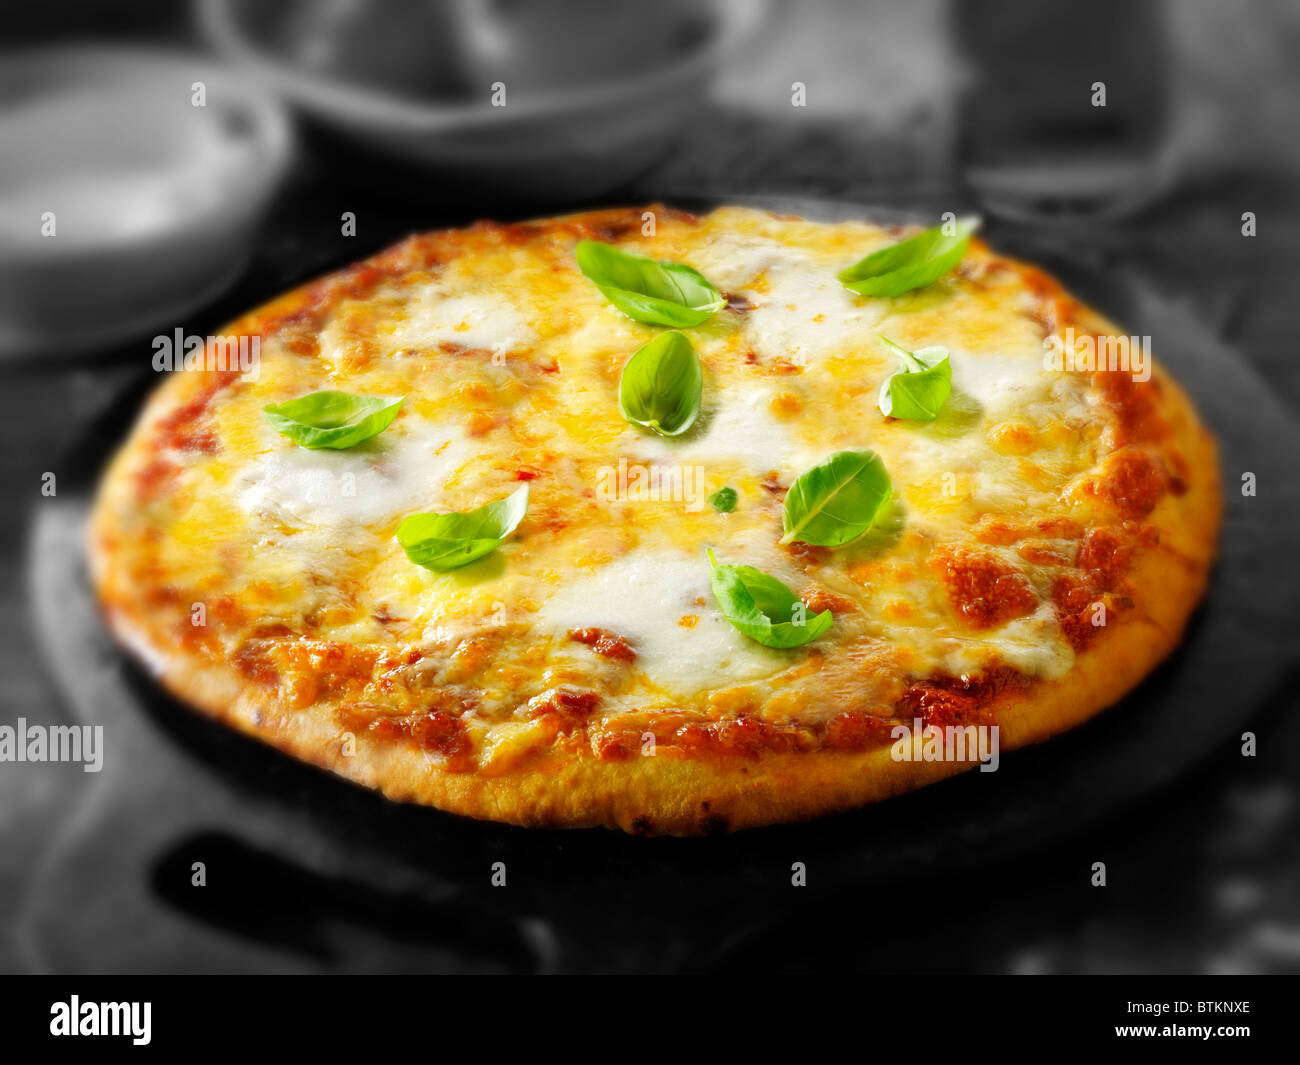 Whole Cheese and Tomato thin crust pizza Stock Photo